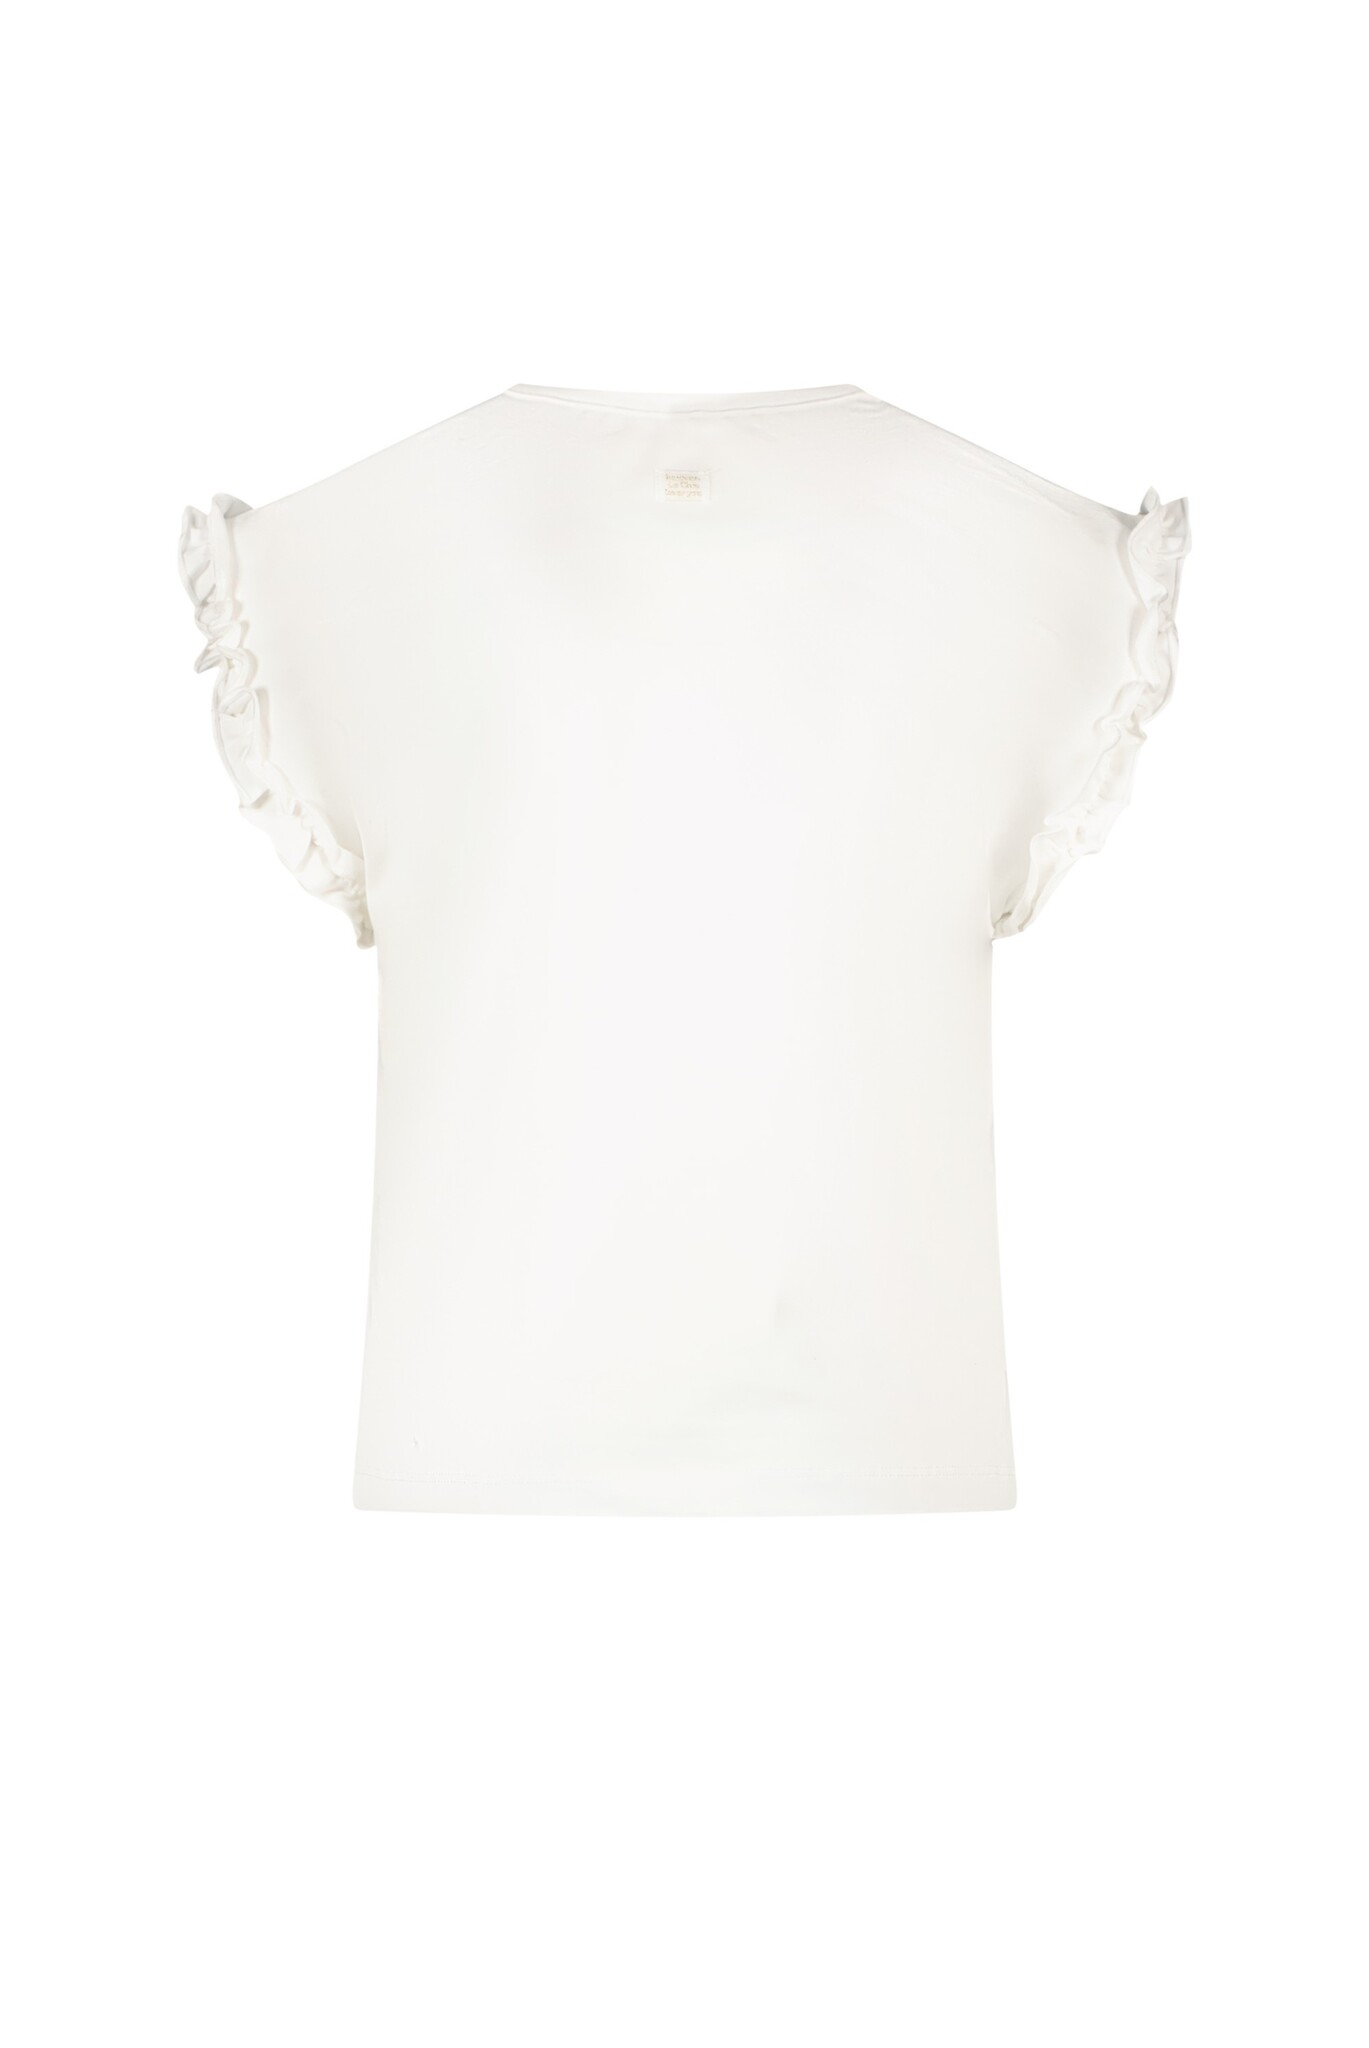 Nopaly Tee - Off White